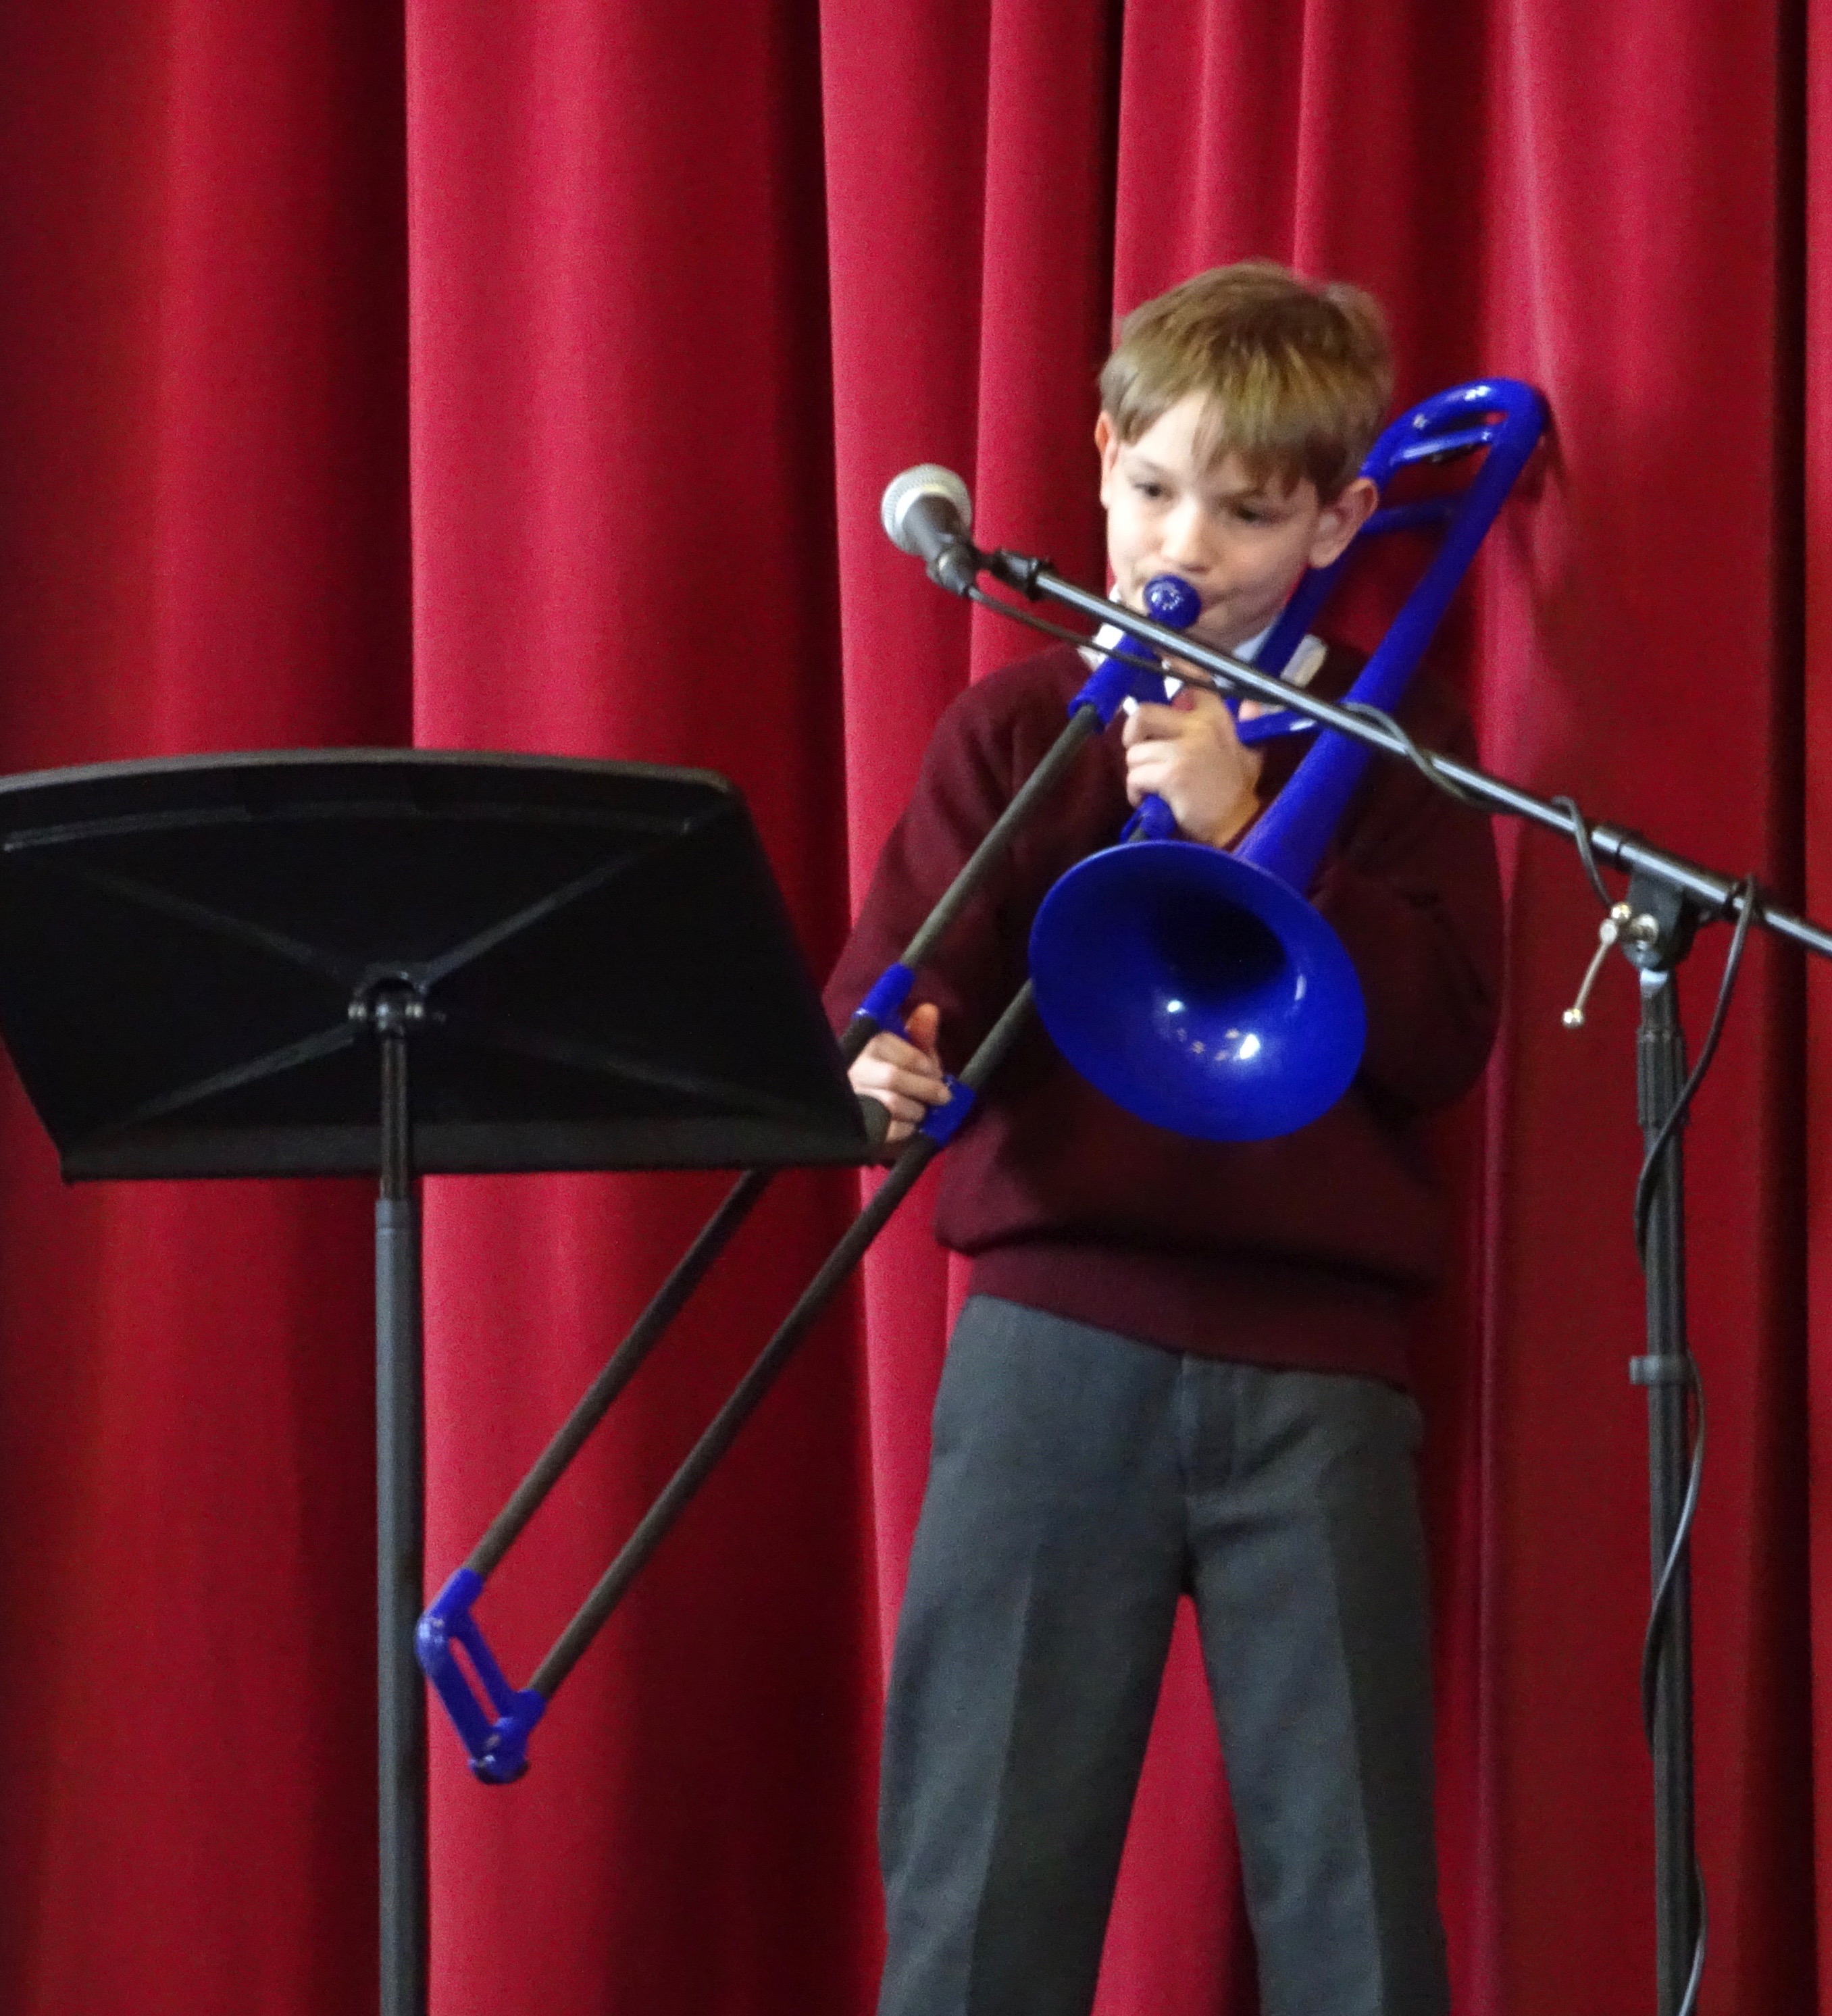 Years 3, 4 and 5 Music Competition - February 2016